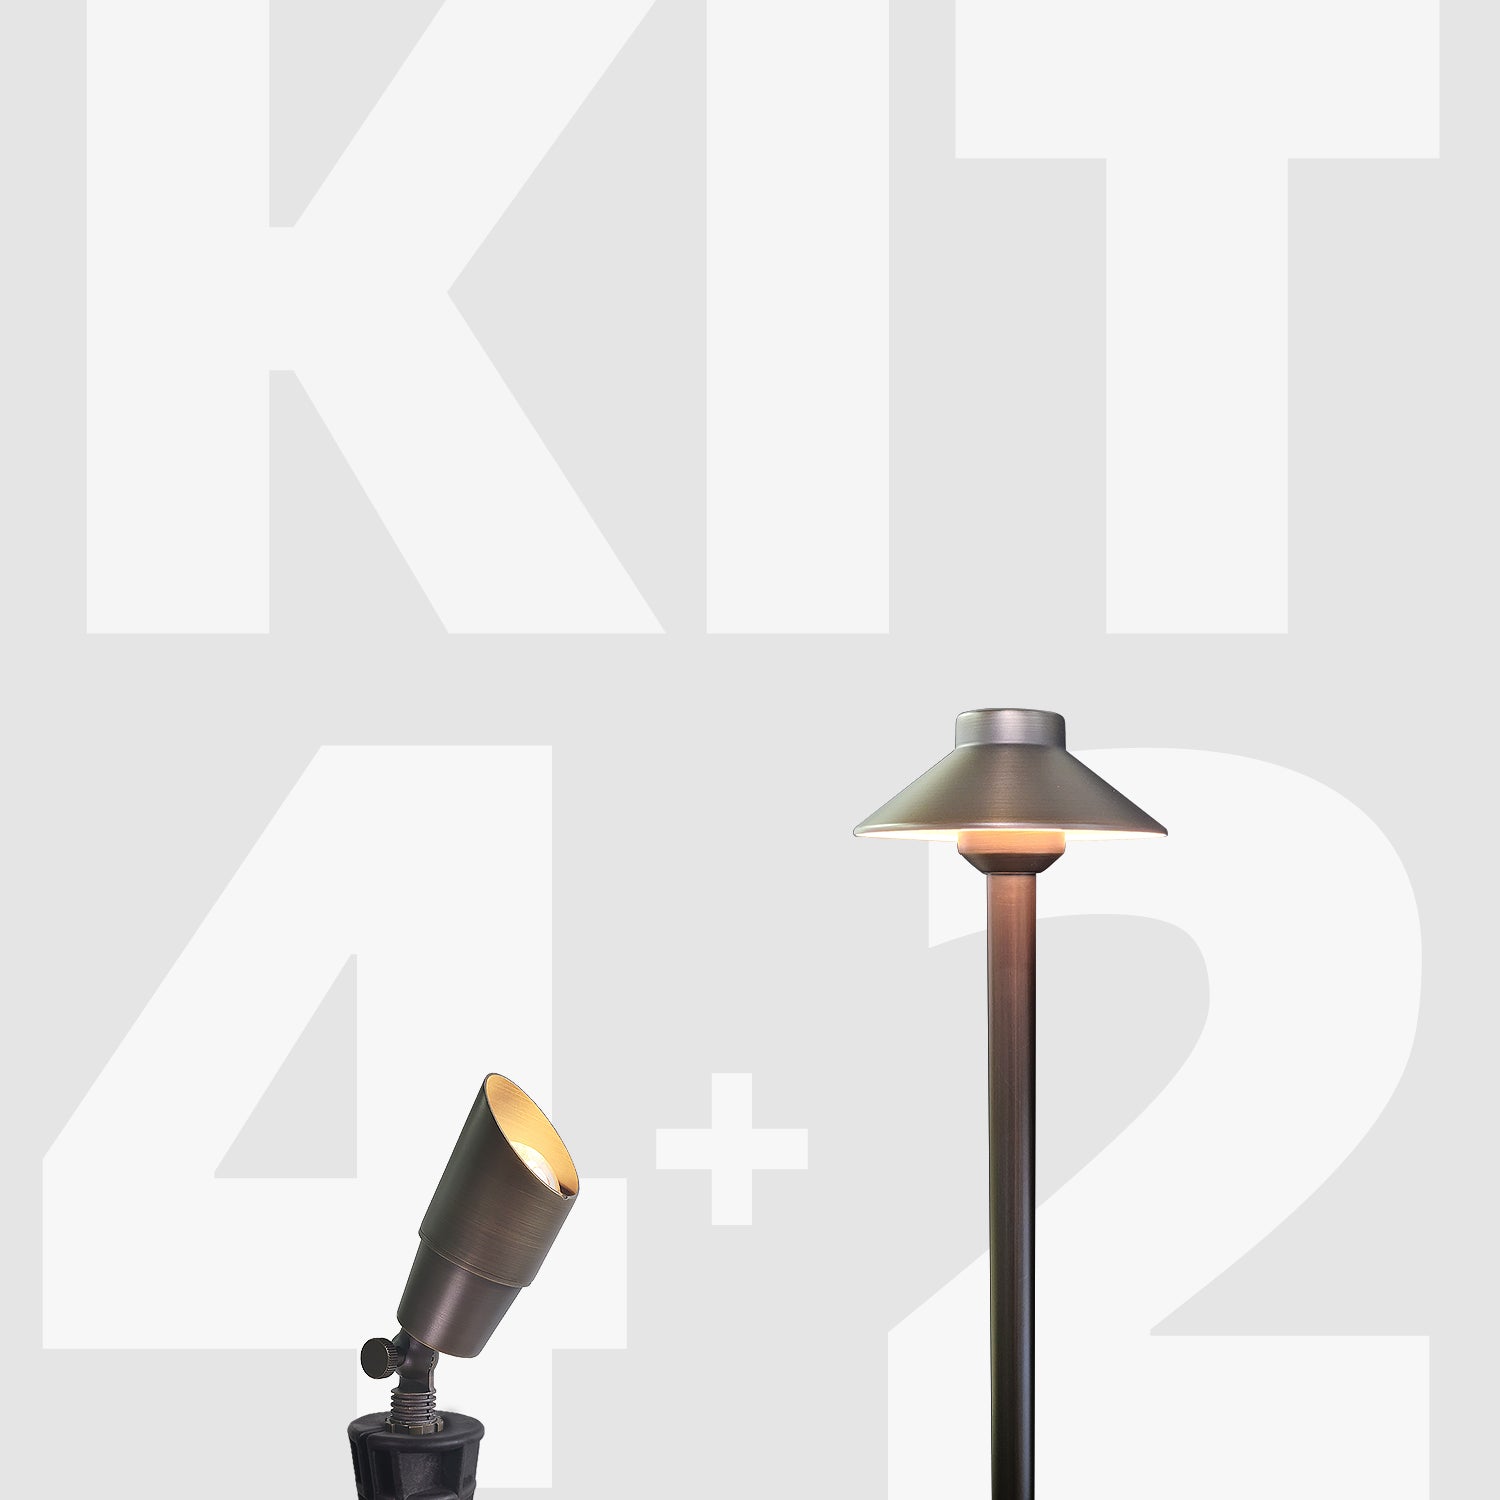 Brass finish LED low voltage outdoor lighting kit featuring spotlight and path light on a gray background with 'KIT 4+2' text.